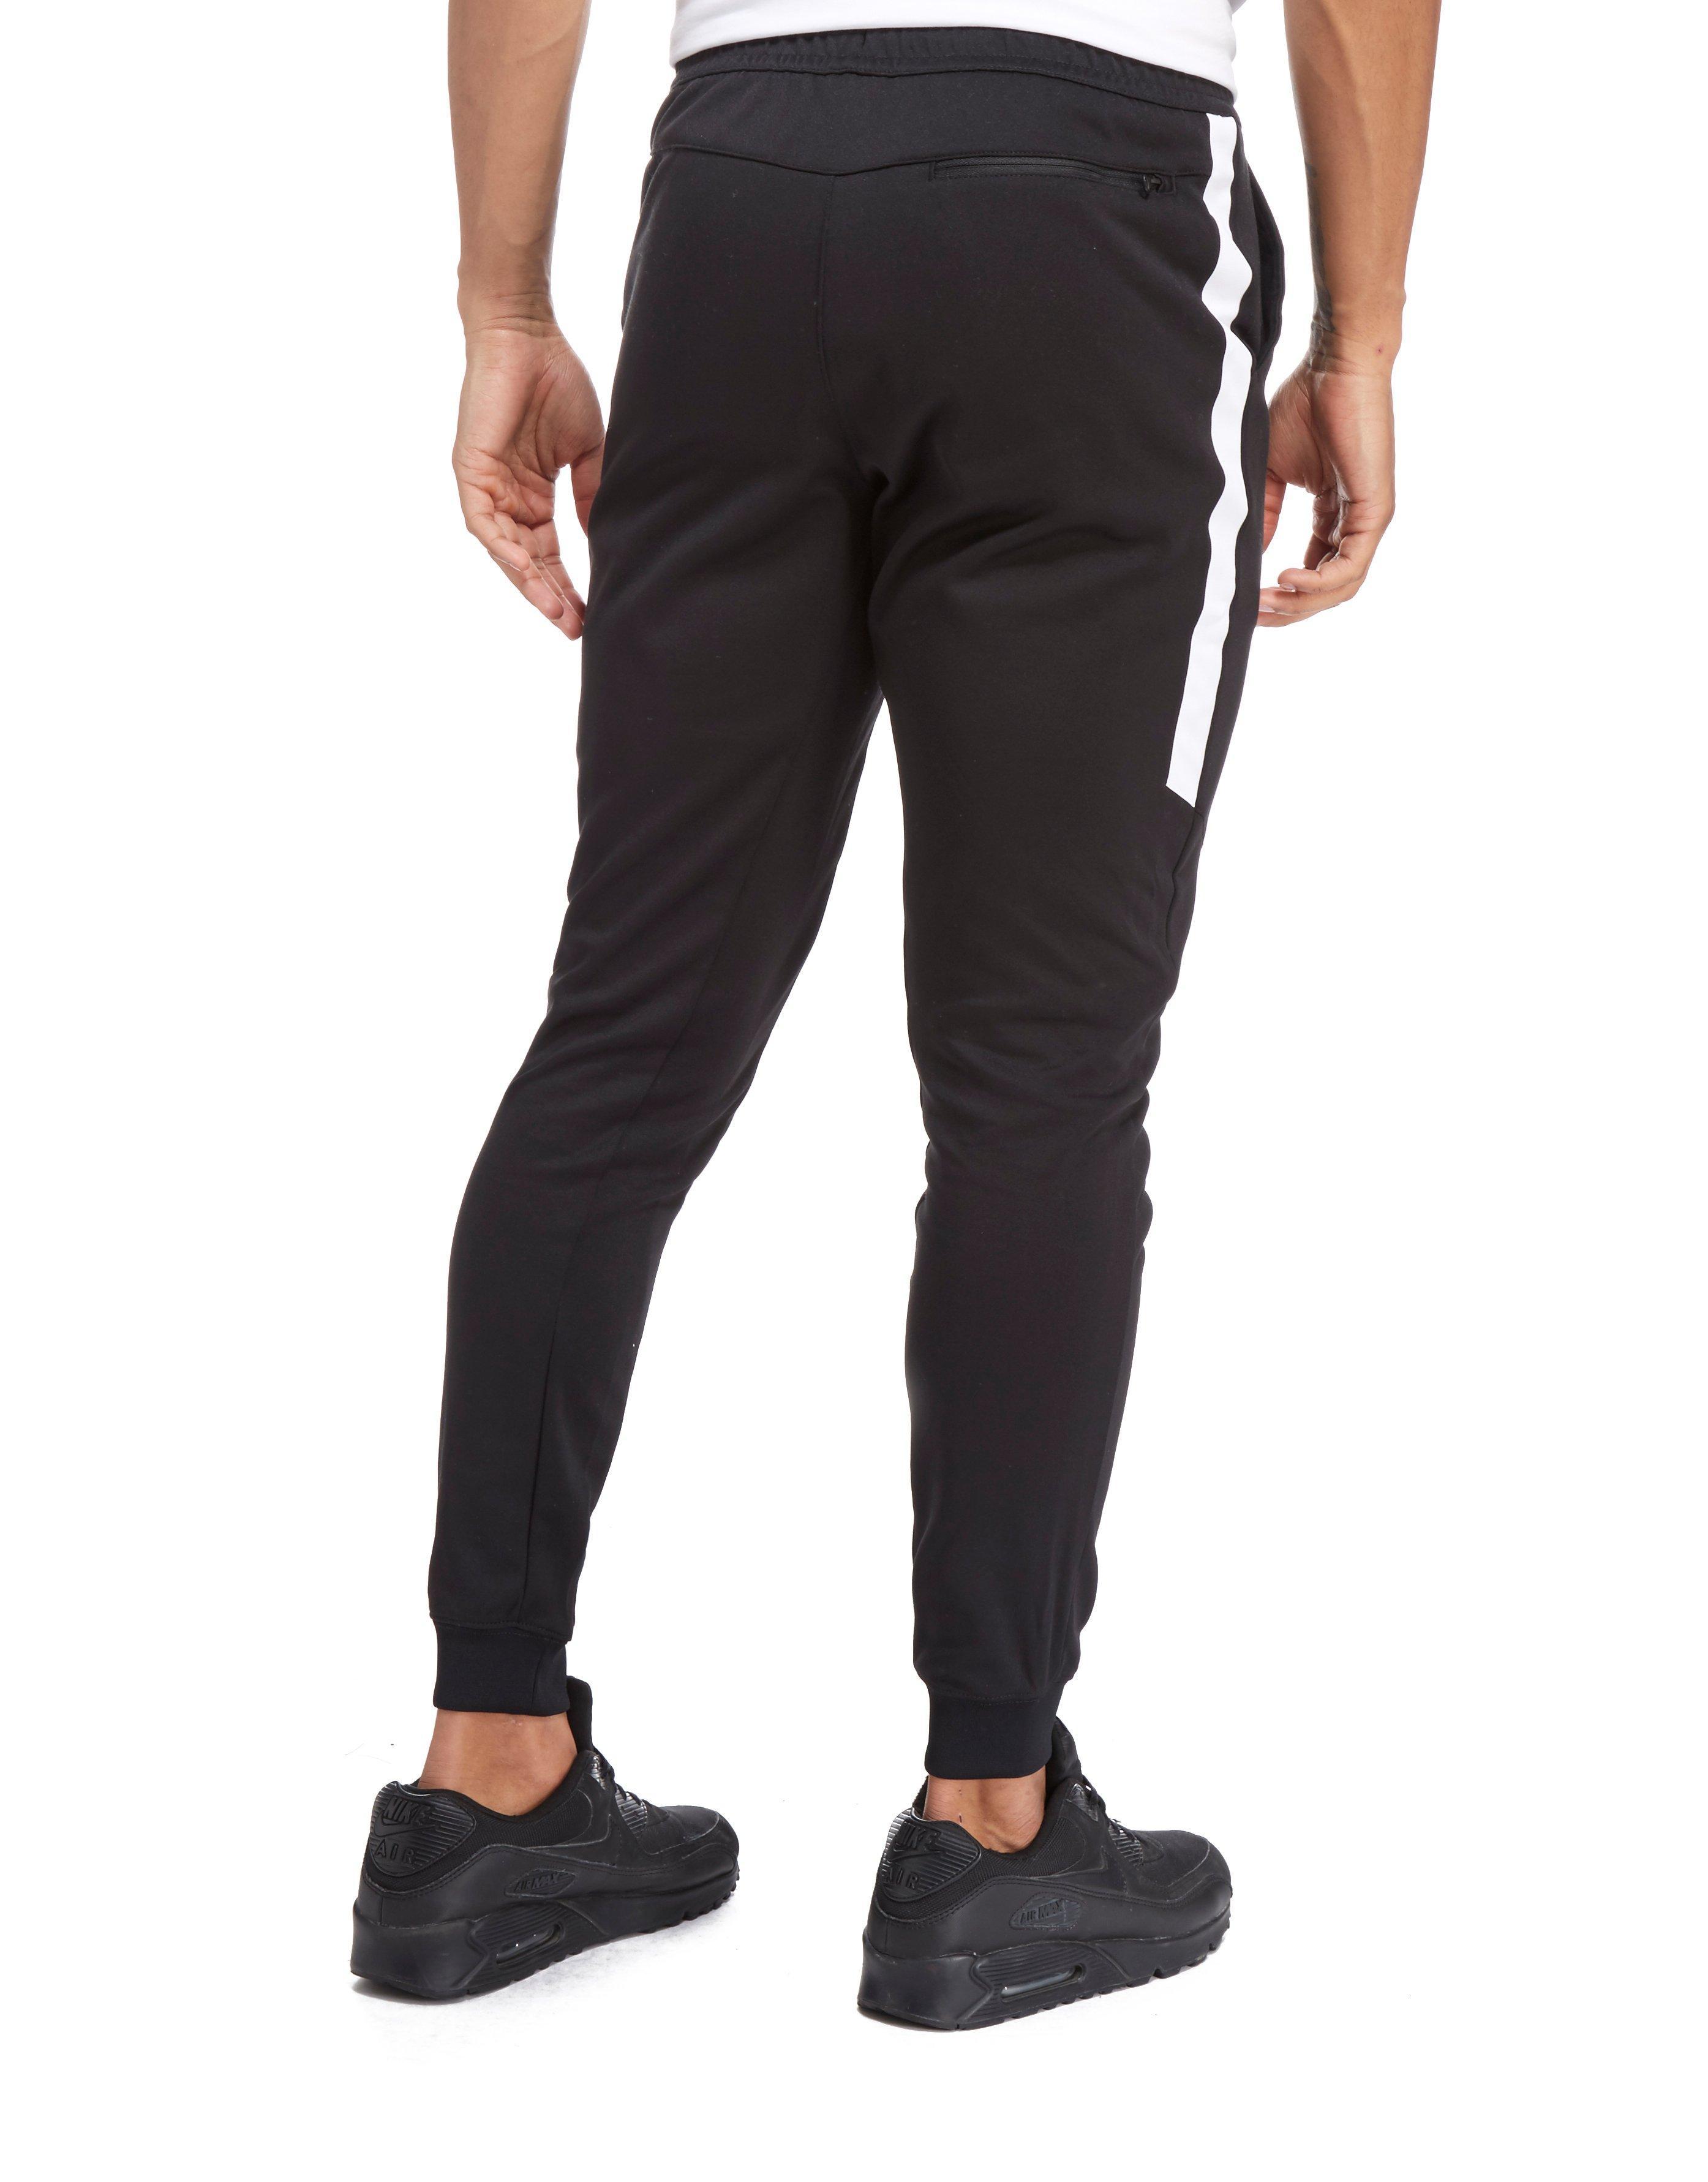 nike tribute pants black and white Off 69% - www.byaydinsuitehotel.com